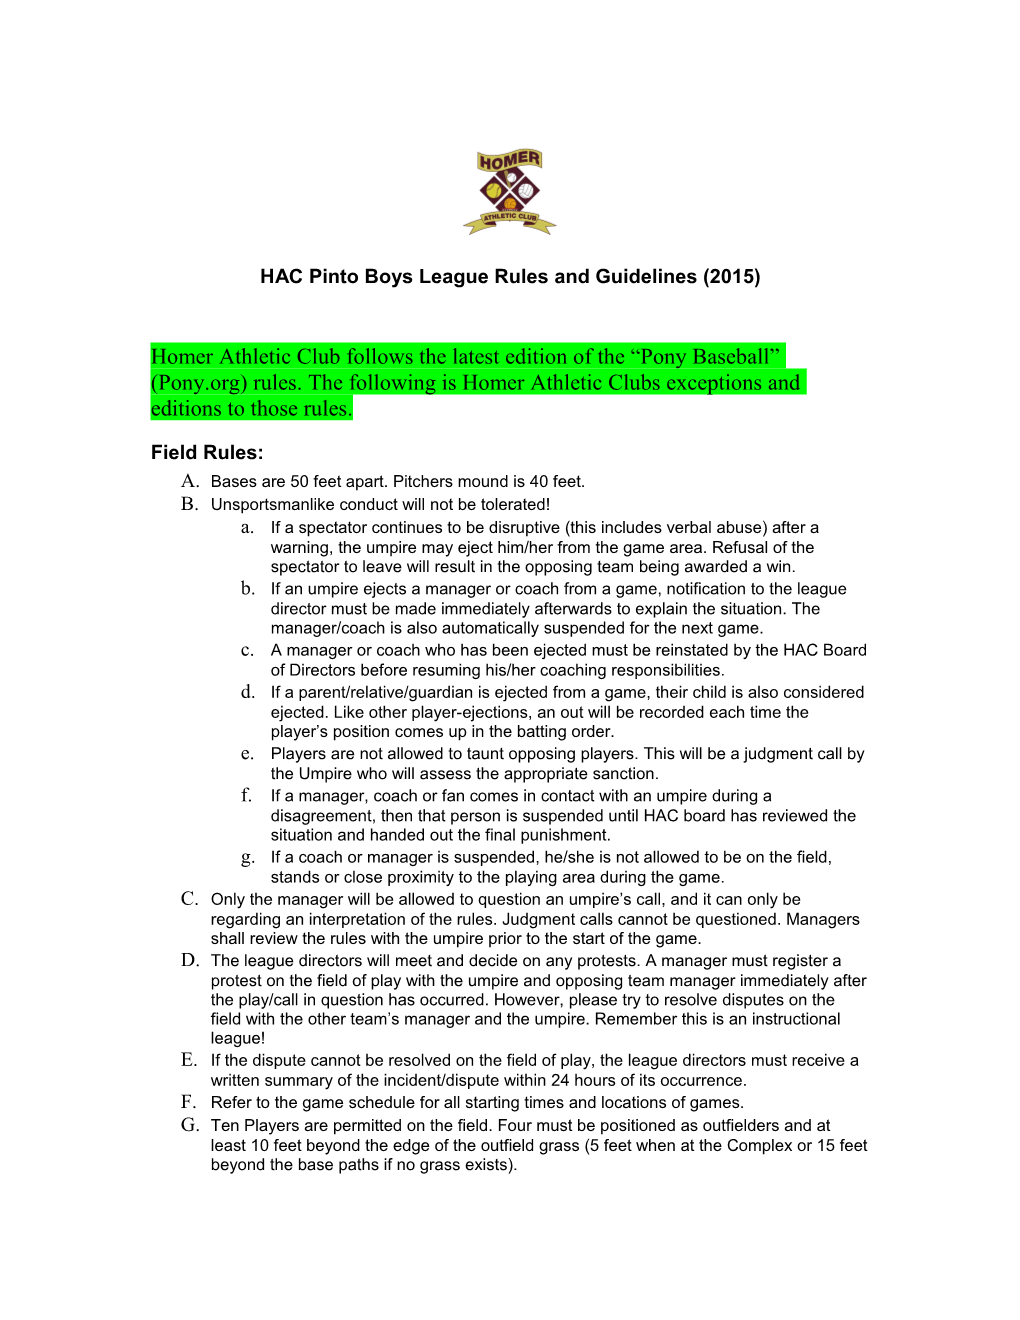 HAC Pinto Boys League Rules and Guidelines (2011)